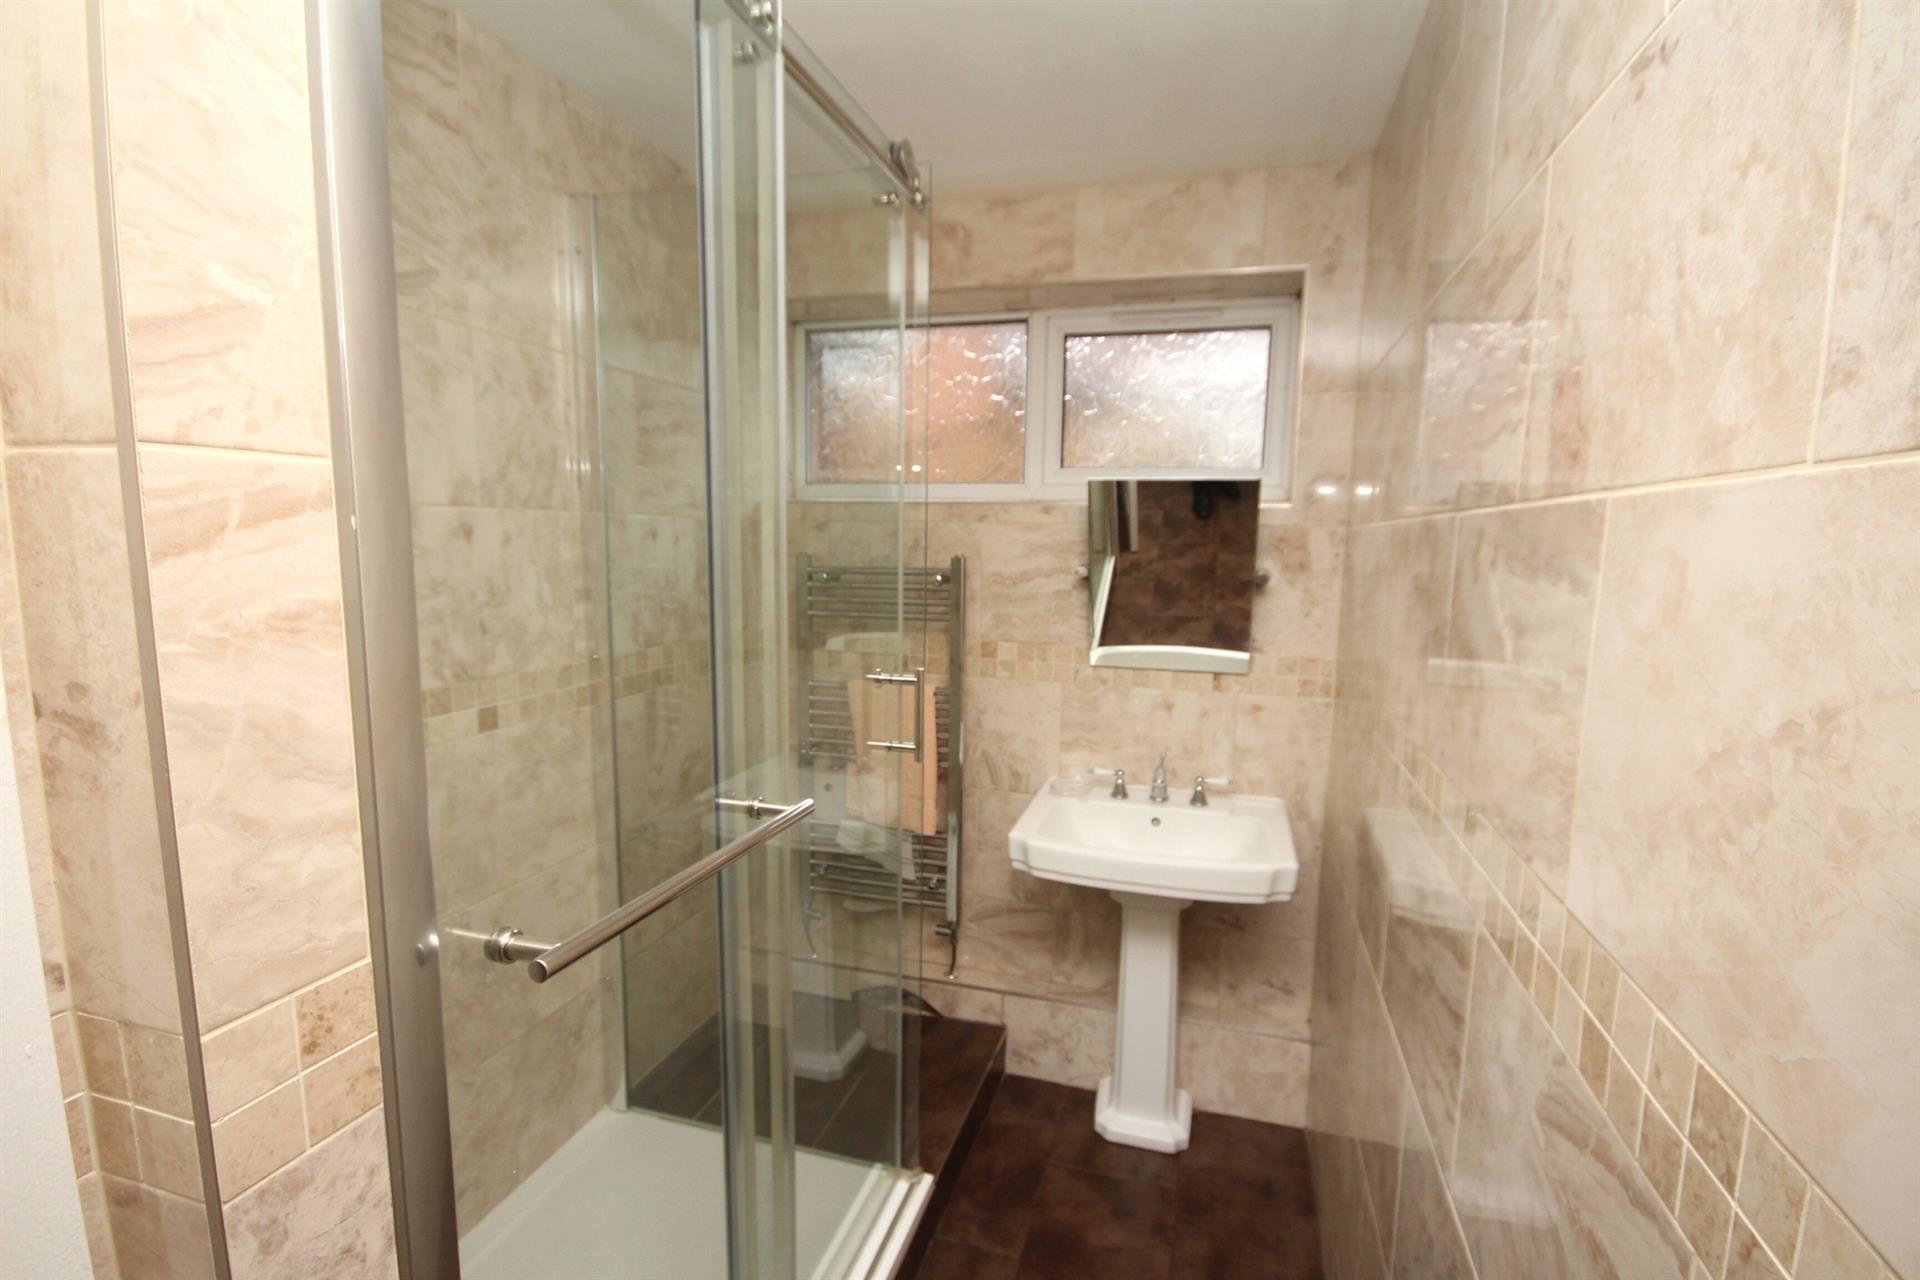 2 bedroom bungalow Let Agreed in Bolton, Greater Manchester - Shower room.